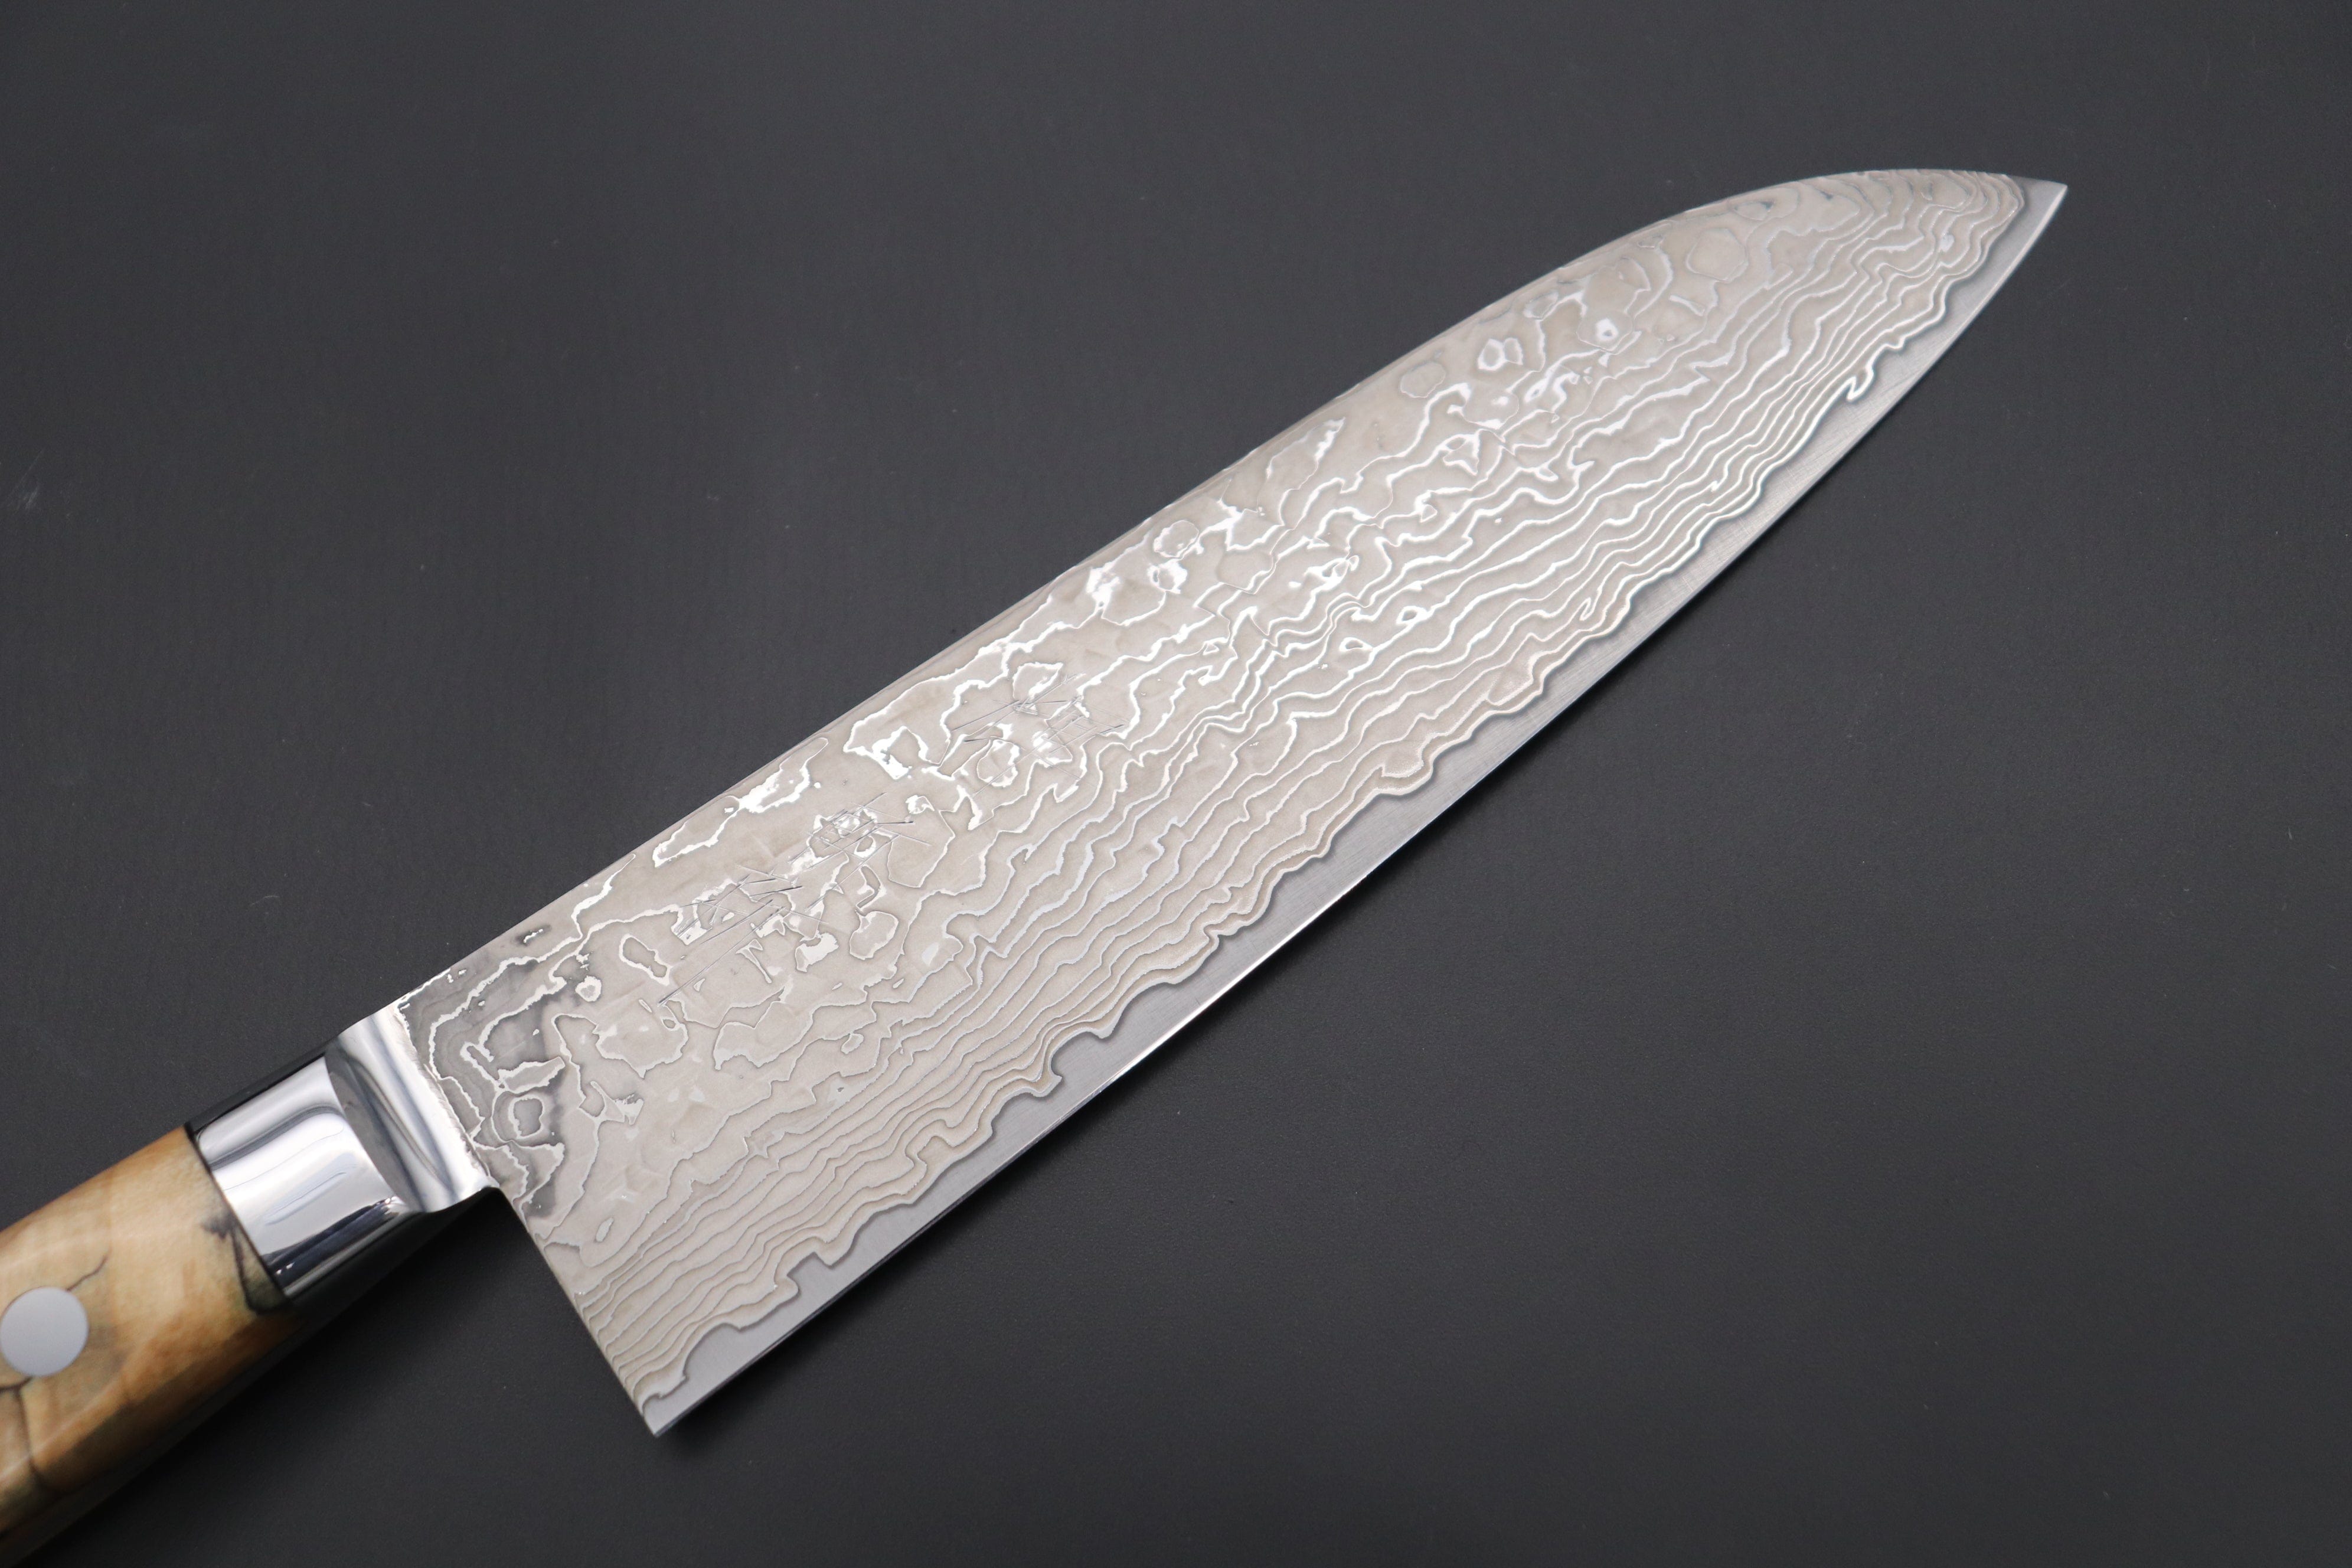 NEW Personalized Hand Forged Big SANTOKU Damascus Chef's Knife Set